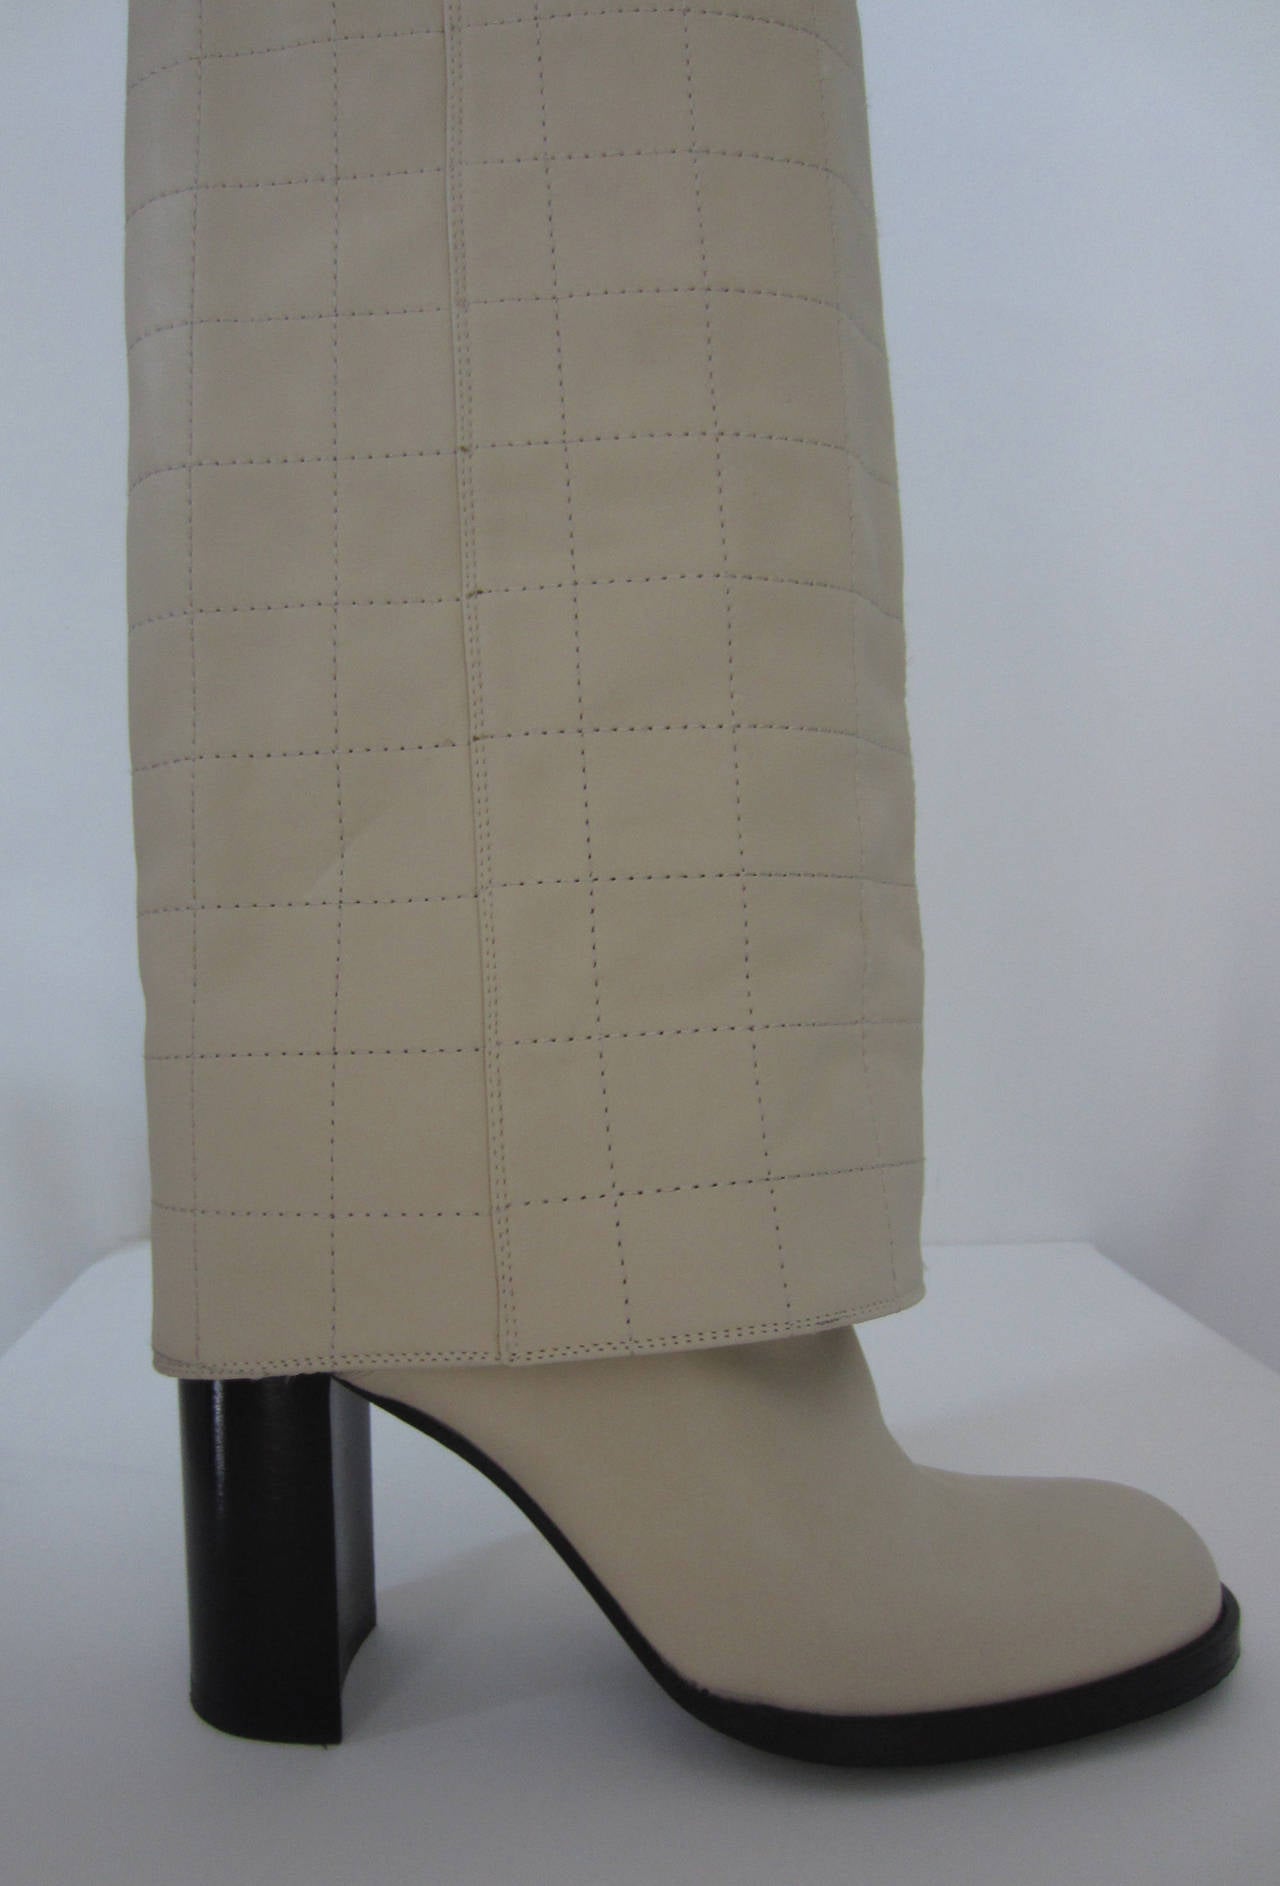 Beautiful High Chanel Pant Boots.
In excellent condition...
These fold over boots, with tonal stitching and round toe and stacked heels
Buckle strap detail on top of the boot.
a wonderful addition to your wardrobe....